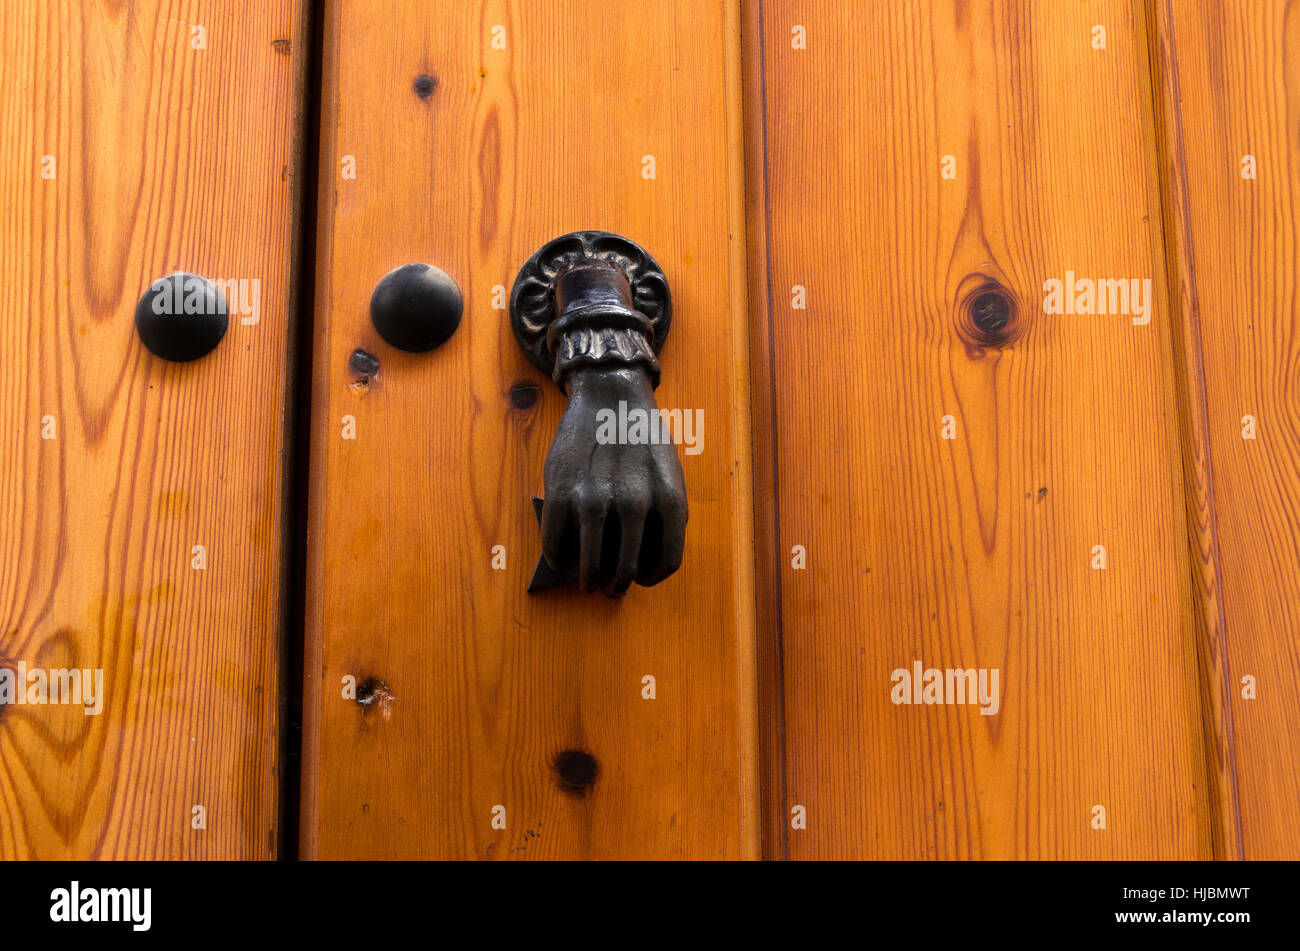 Close up of door made of wooden boards, held by large decorative brass bolts.  Metal door knocker in shape of closed fist. Stock Photo